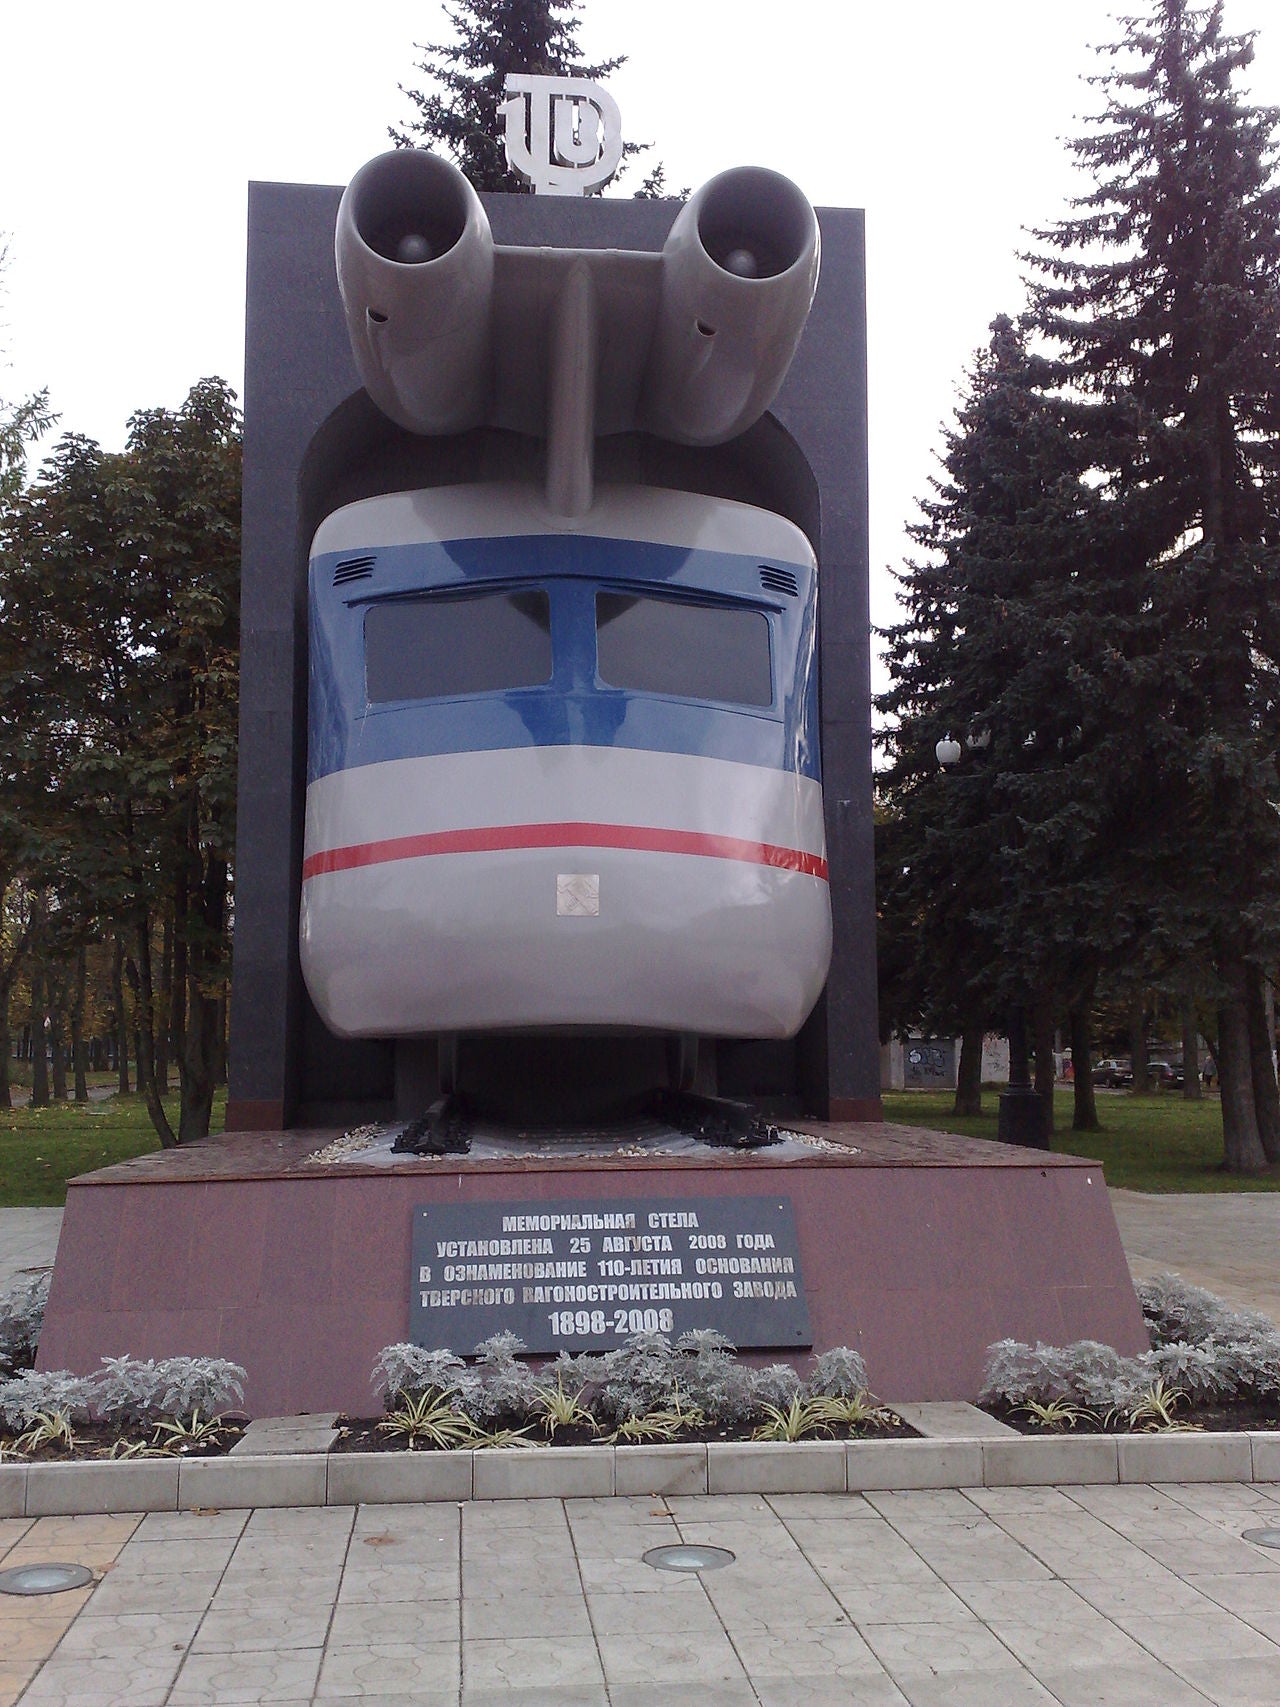 Monument at the rail-car factory in Tver depicting a Turbojet train, picture by Eskimozzz on Wikipedia